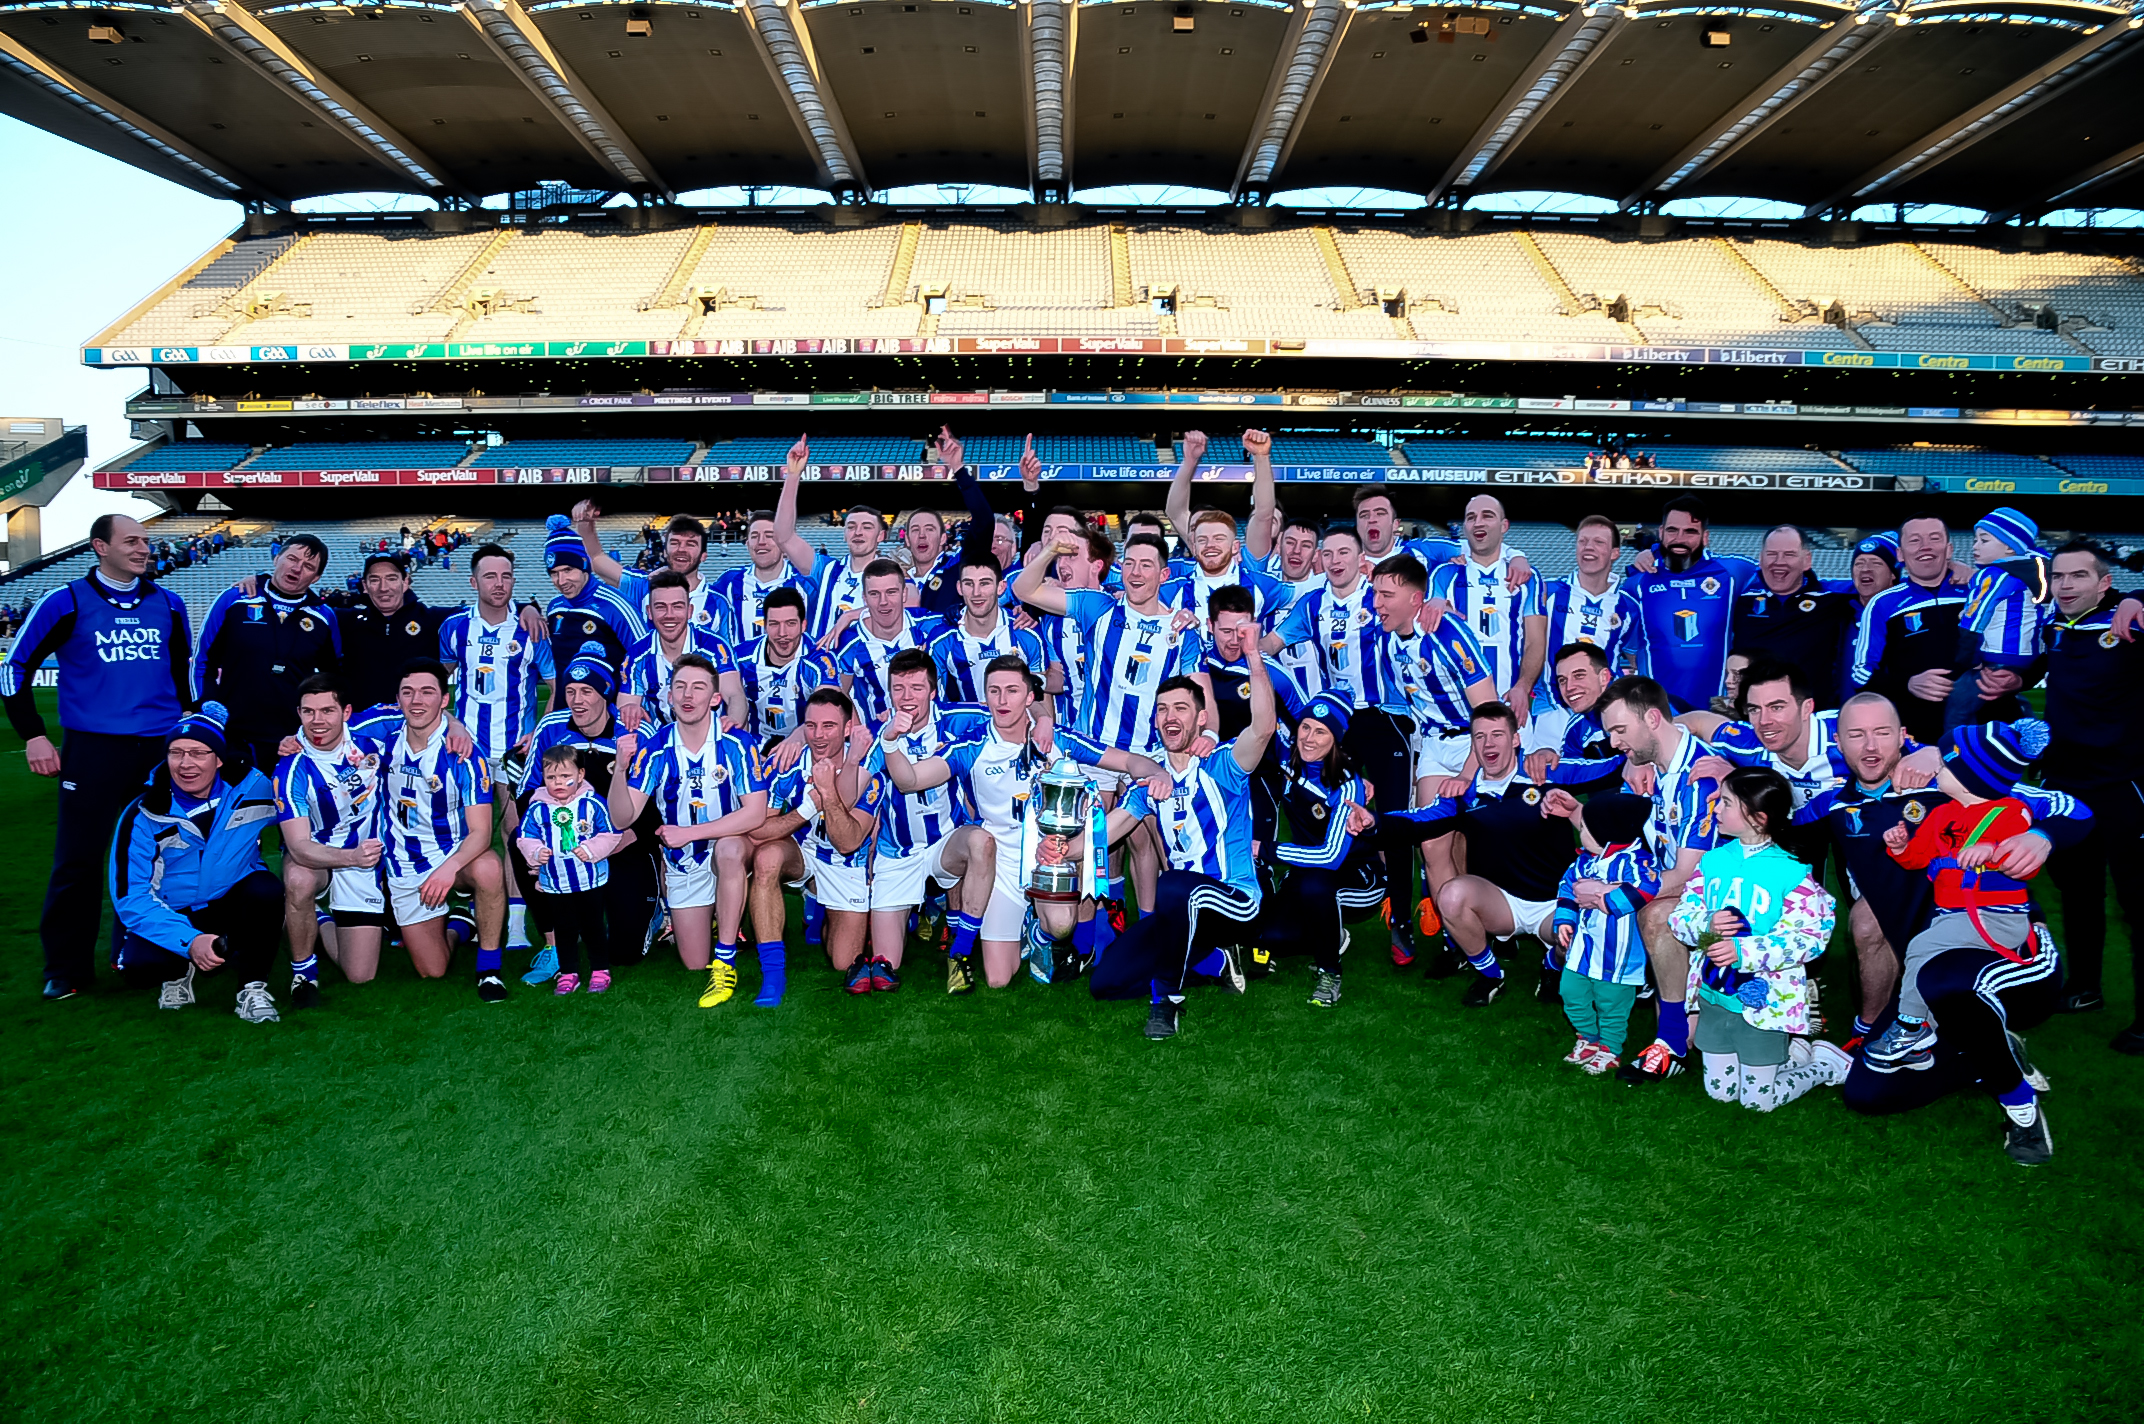 ALL IRELAND CHAMPS